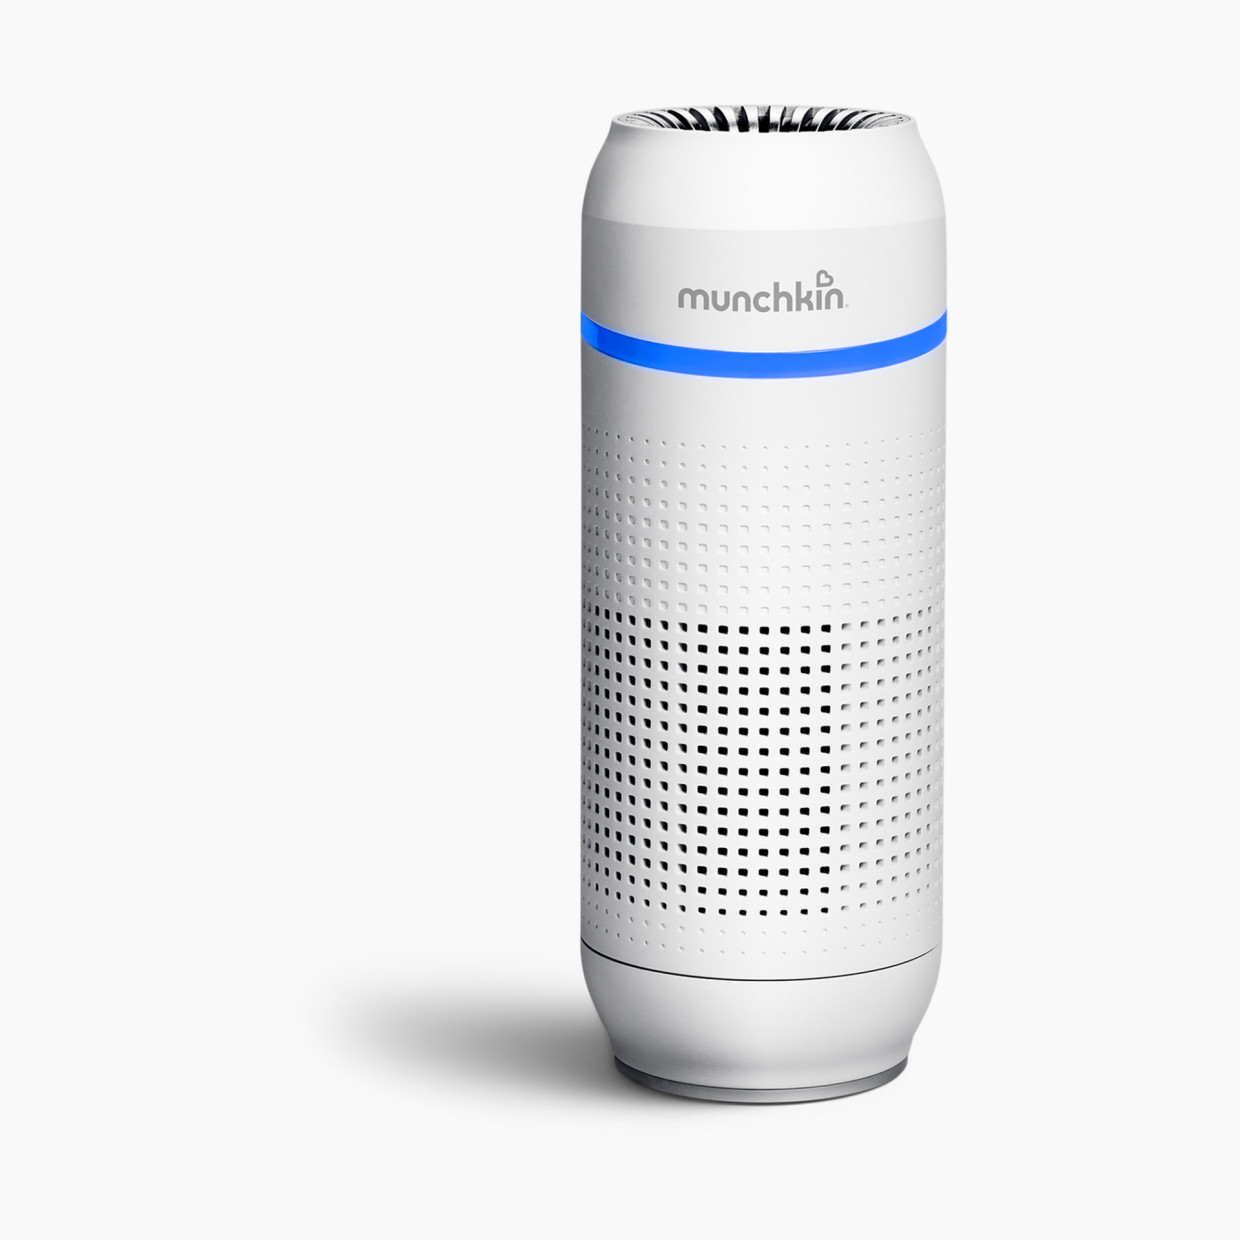 Munchkin Portable Air Purifier, 4-Stage True Hepa Filtration System.